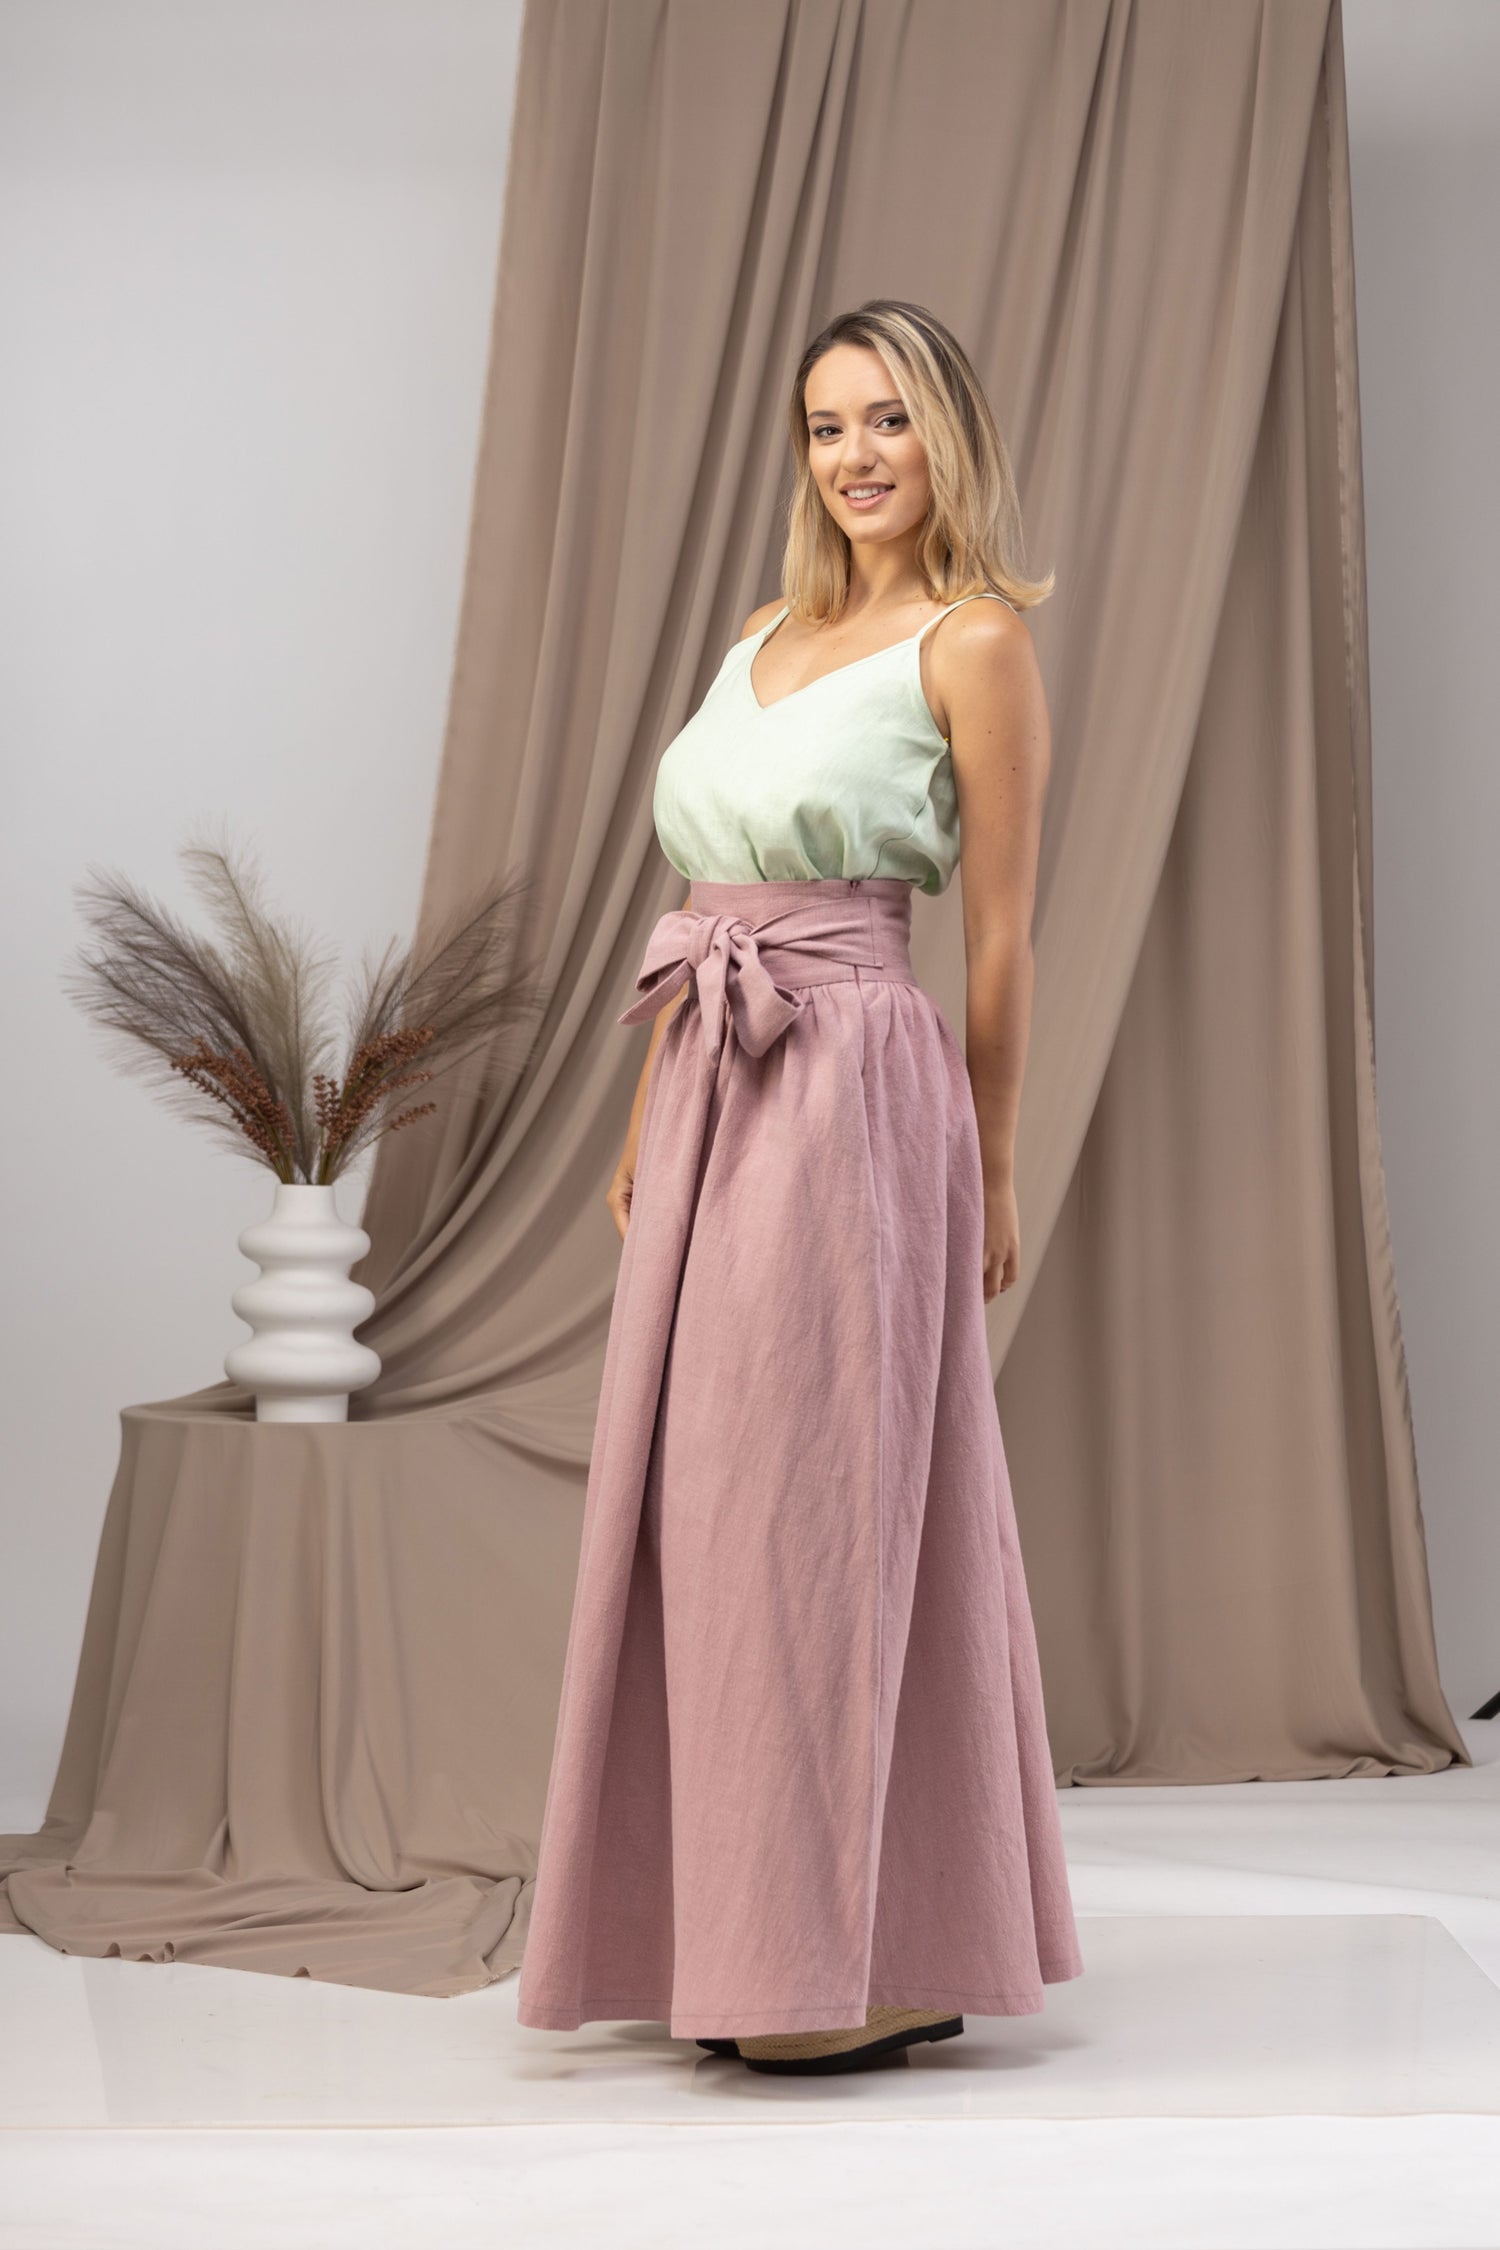 Linen High Waist Maxi Skirt - Pockets included for added convenience - from NikkaPlace | Effortless fashion for easy living